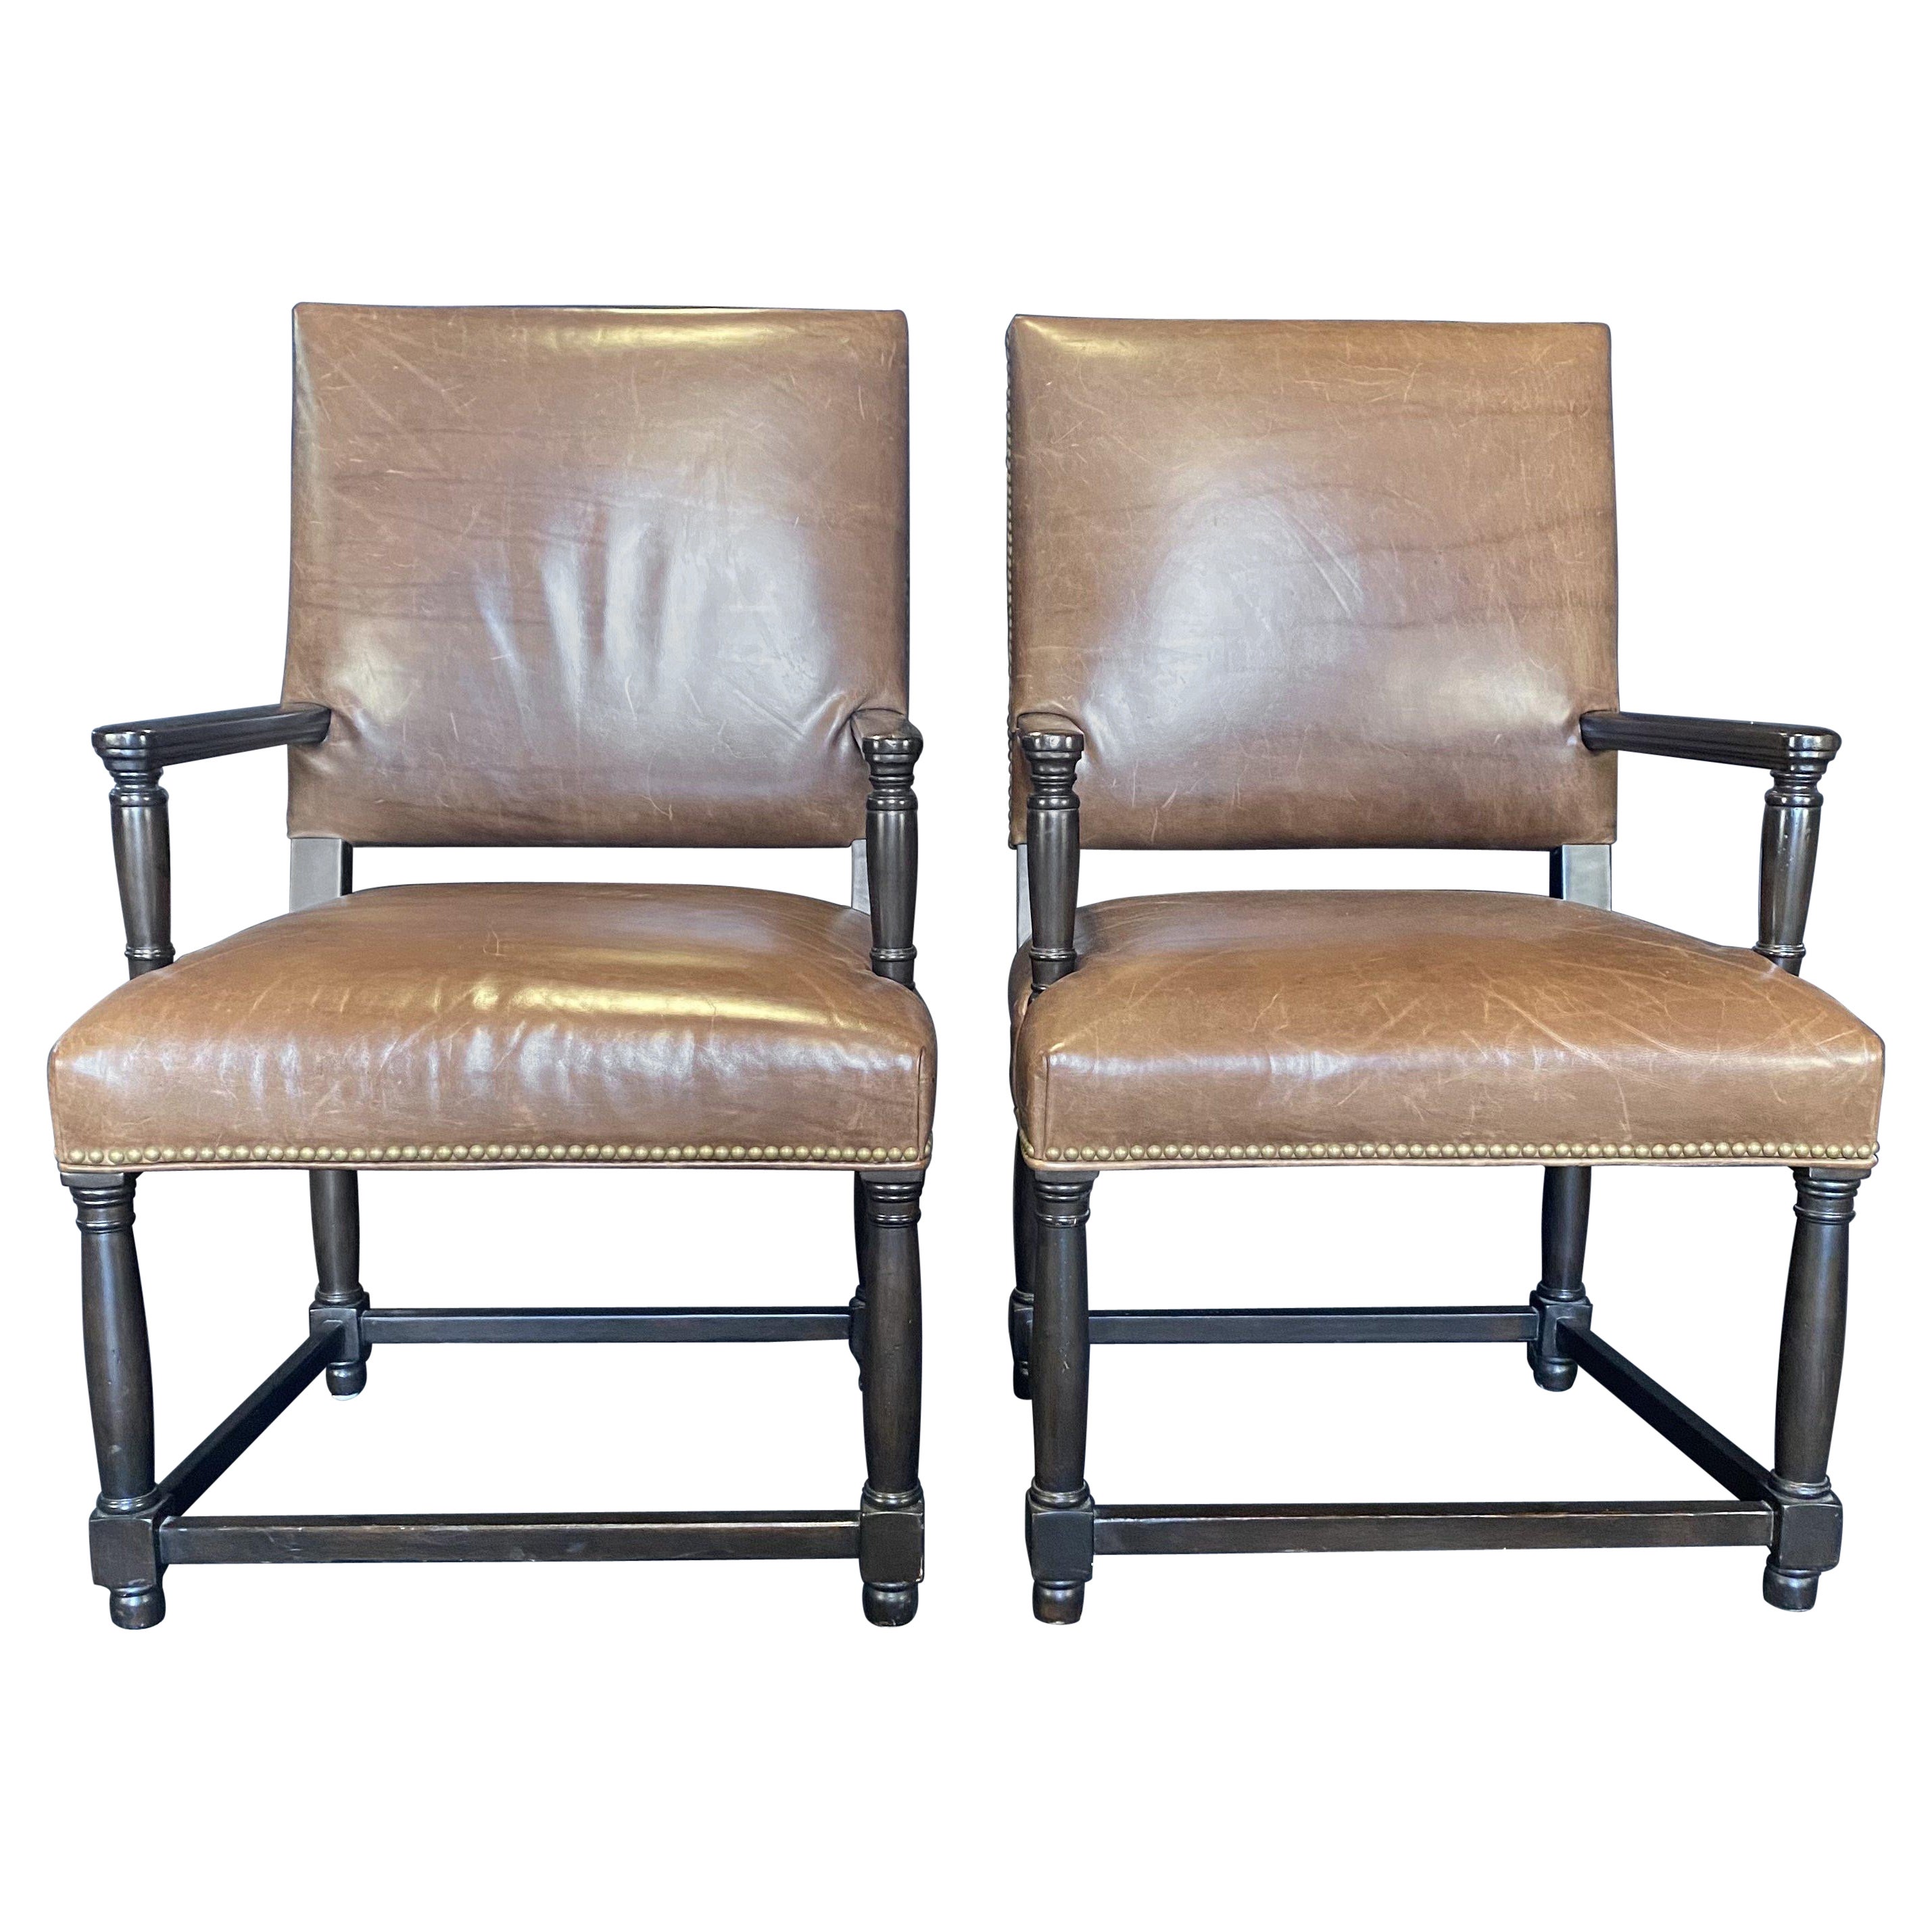 Masculine Pair of Tobacco Brown Leather Armchairs with Nailhead Trim